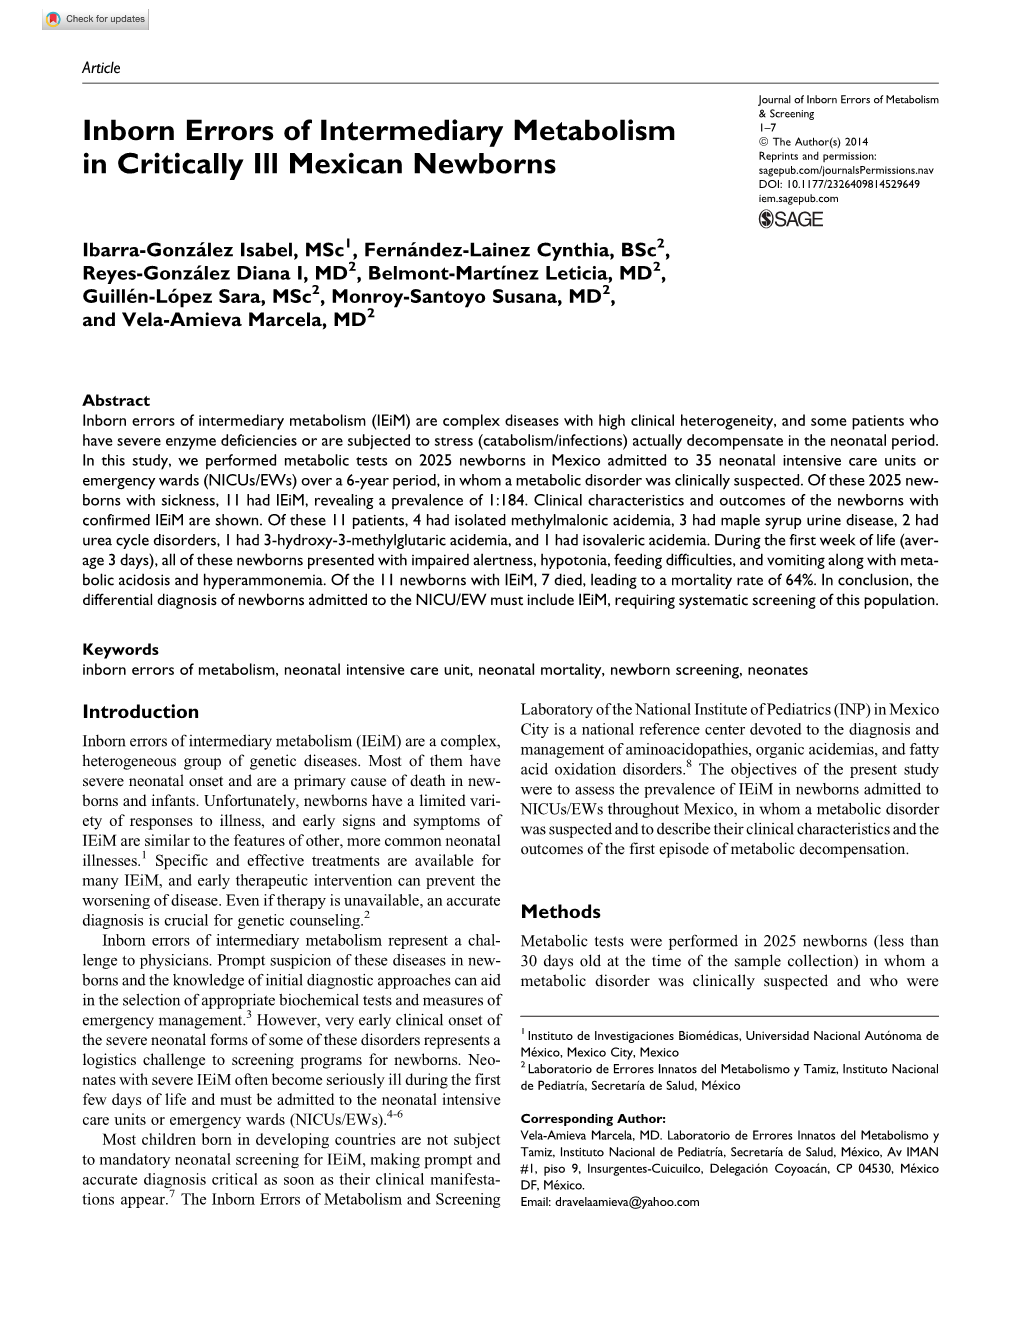 Inborn Errors of Intermediary Metabolism in Critically Ill Mexican